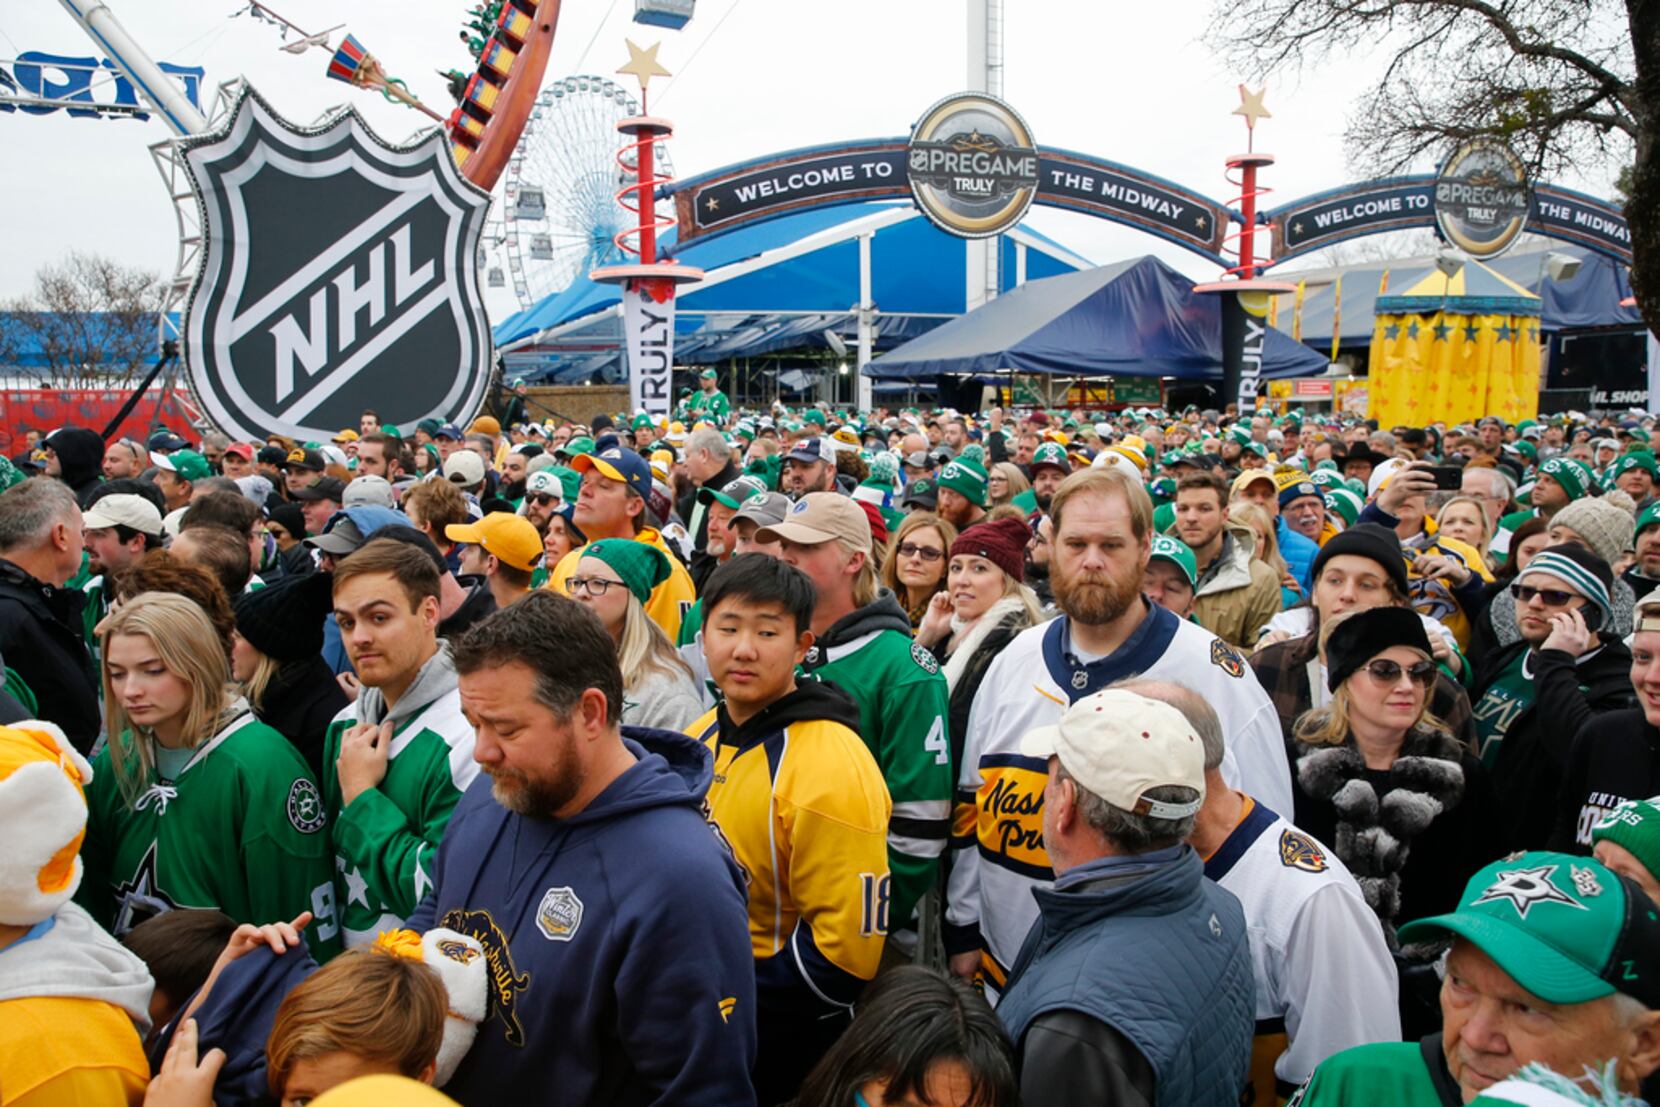 Beyond the spectacle, the Wild has a job to do in Winter Classic